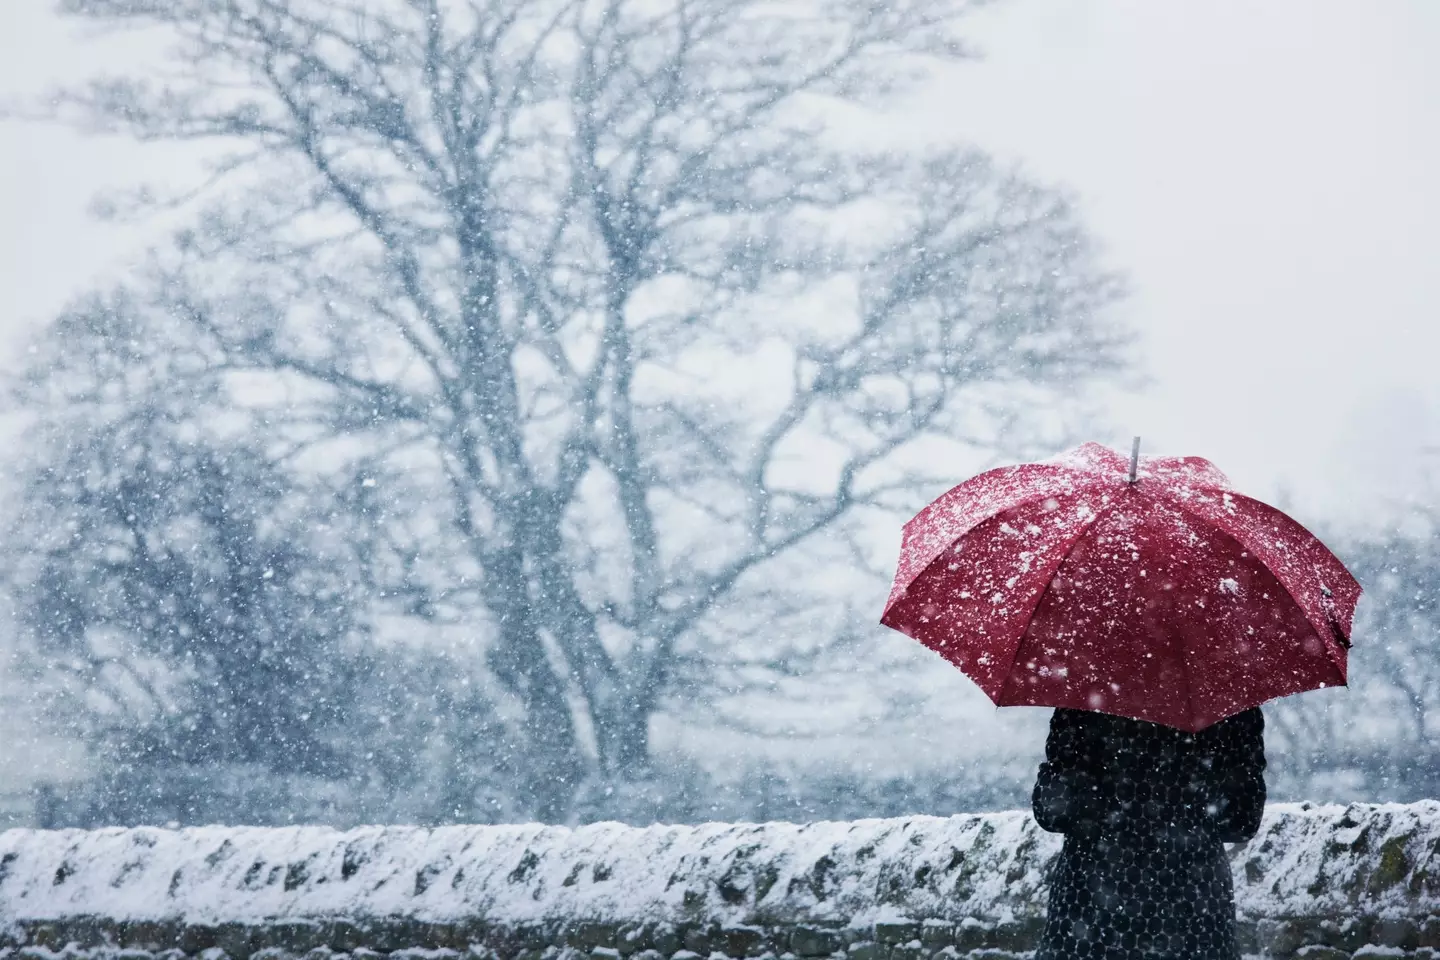 The Met Office has warned that parts of Britain will be hit with sleet and snow - as Saturday is expected to be the coldest night of the year so far, with first sub-zero temperatures.